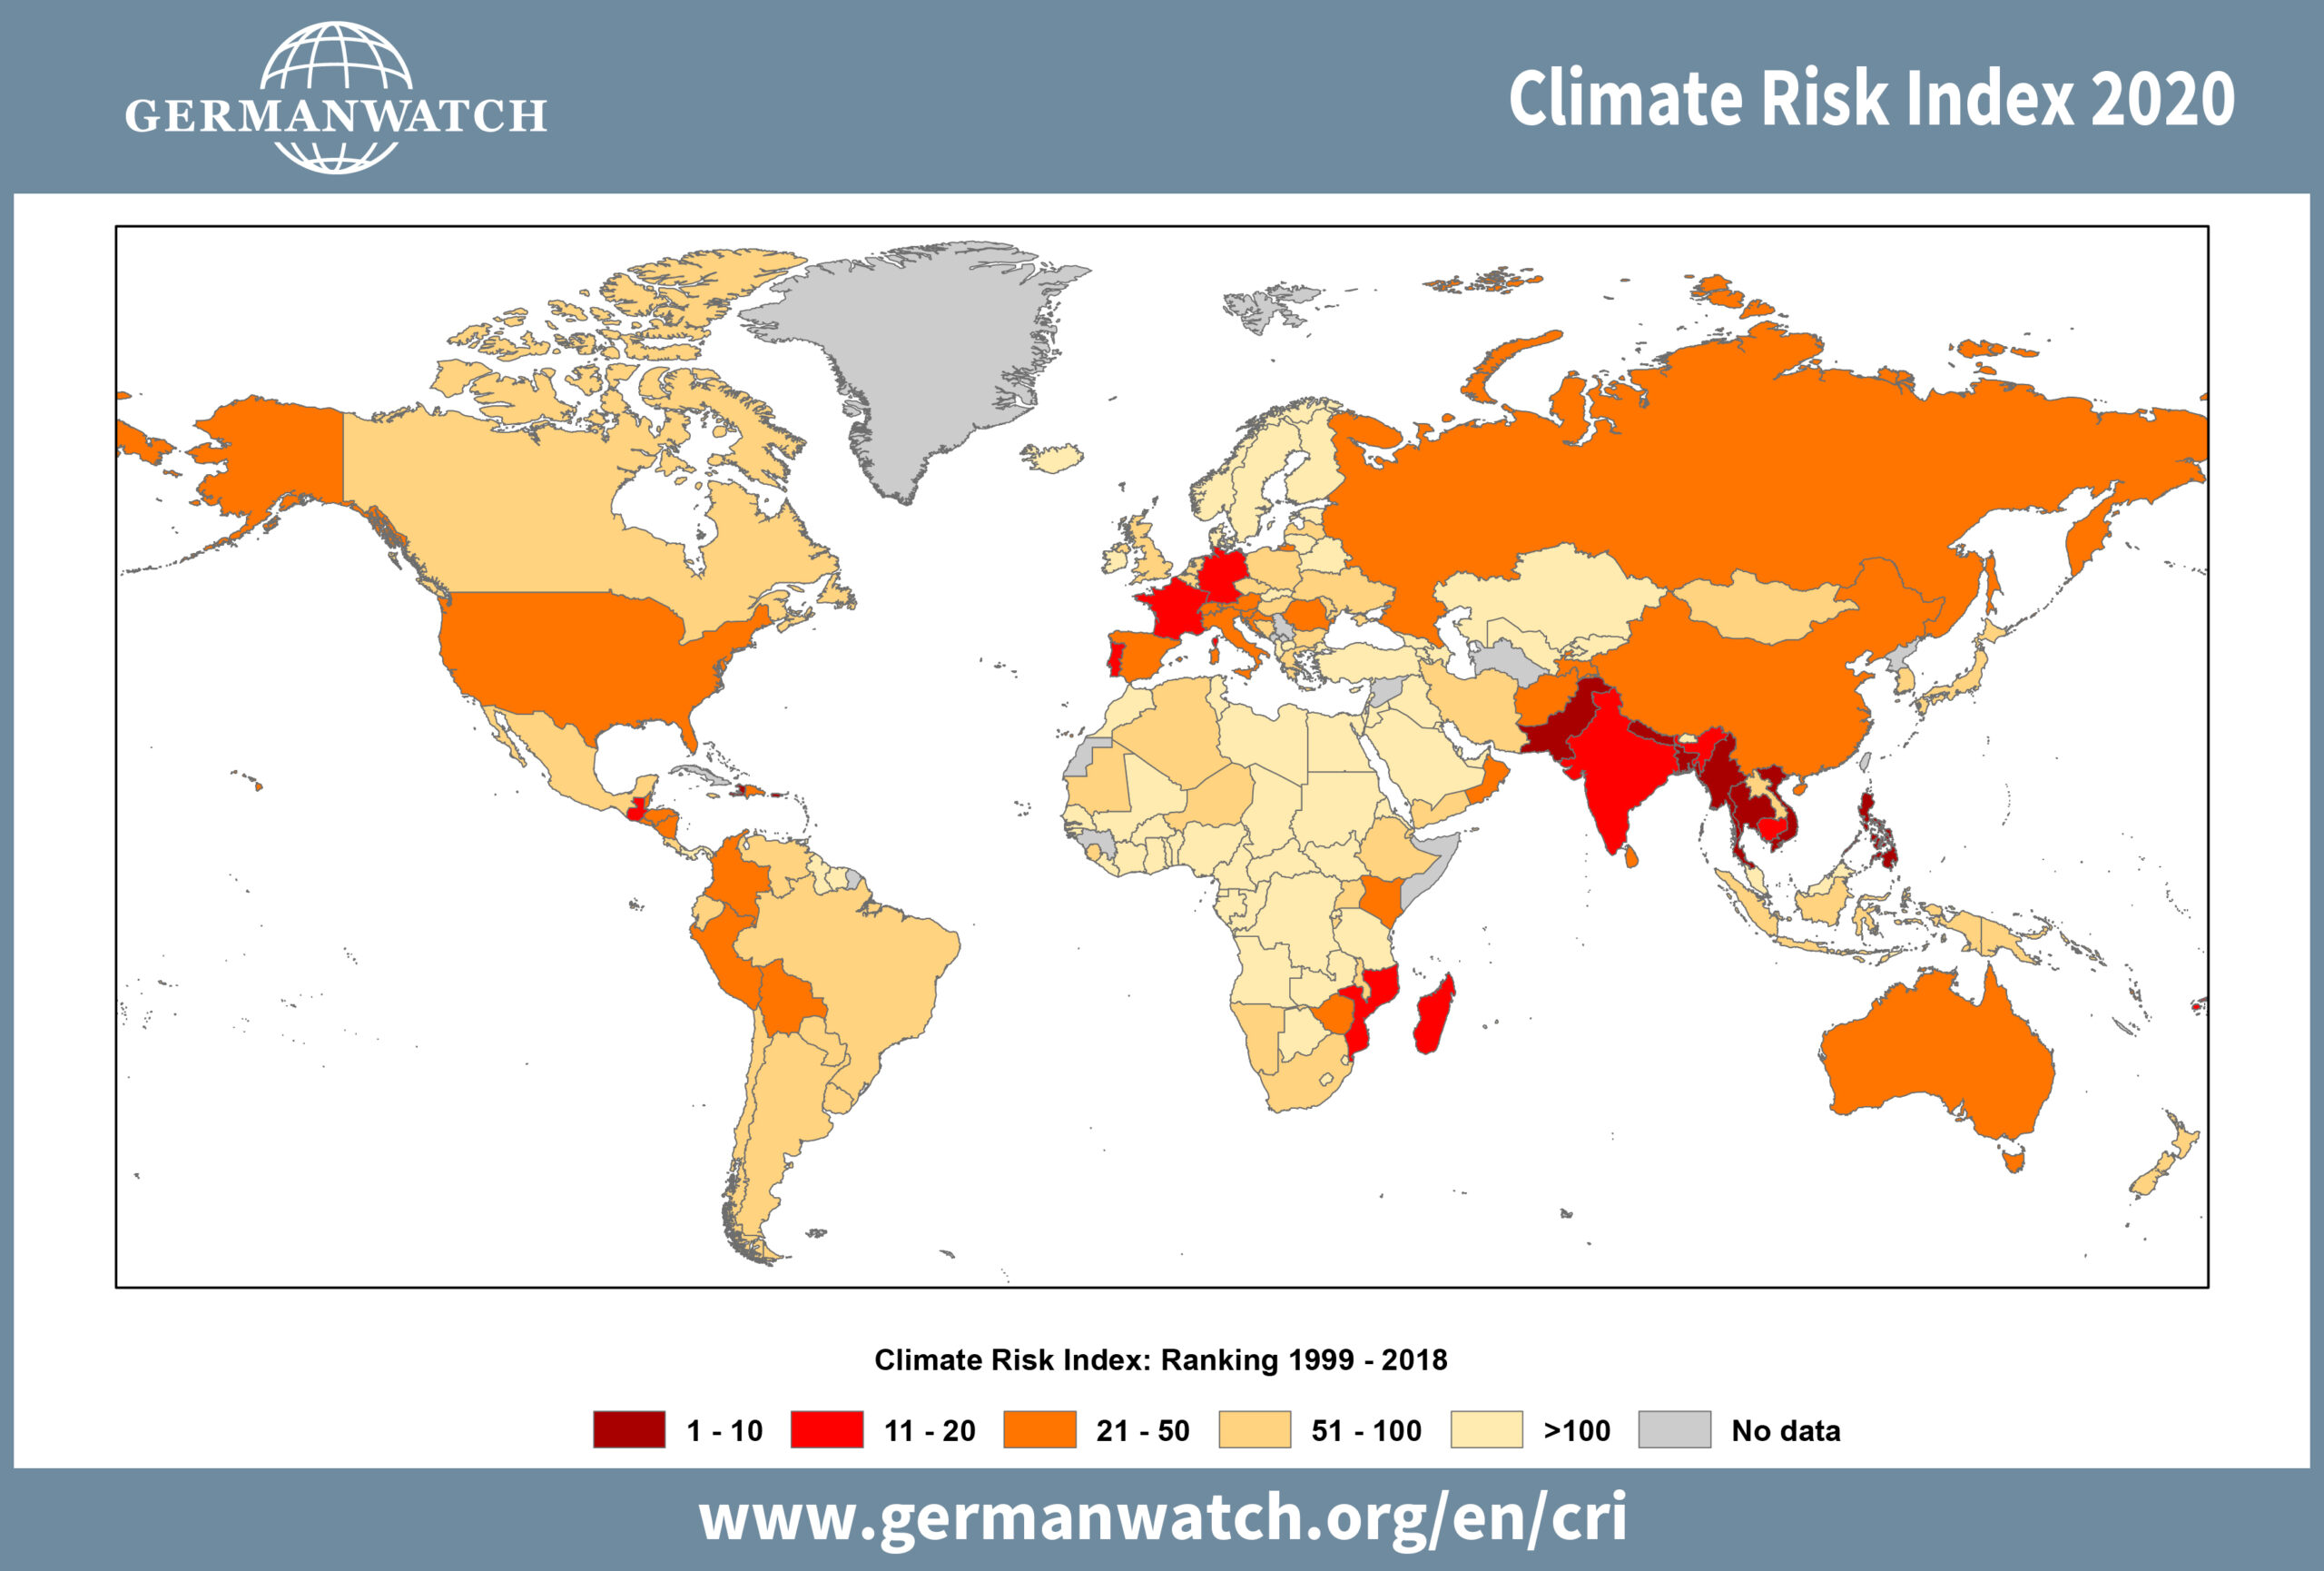 The Climate Risk Index 2020